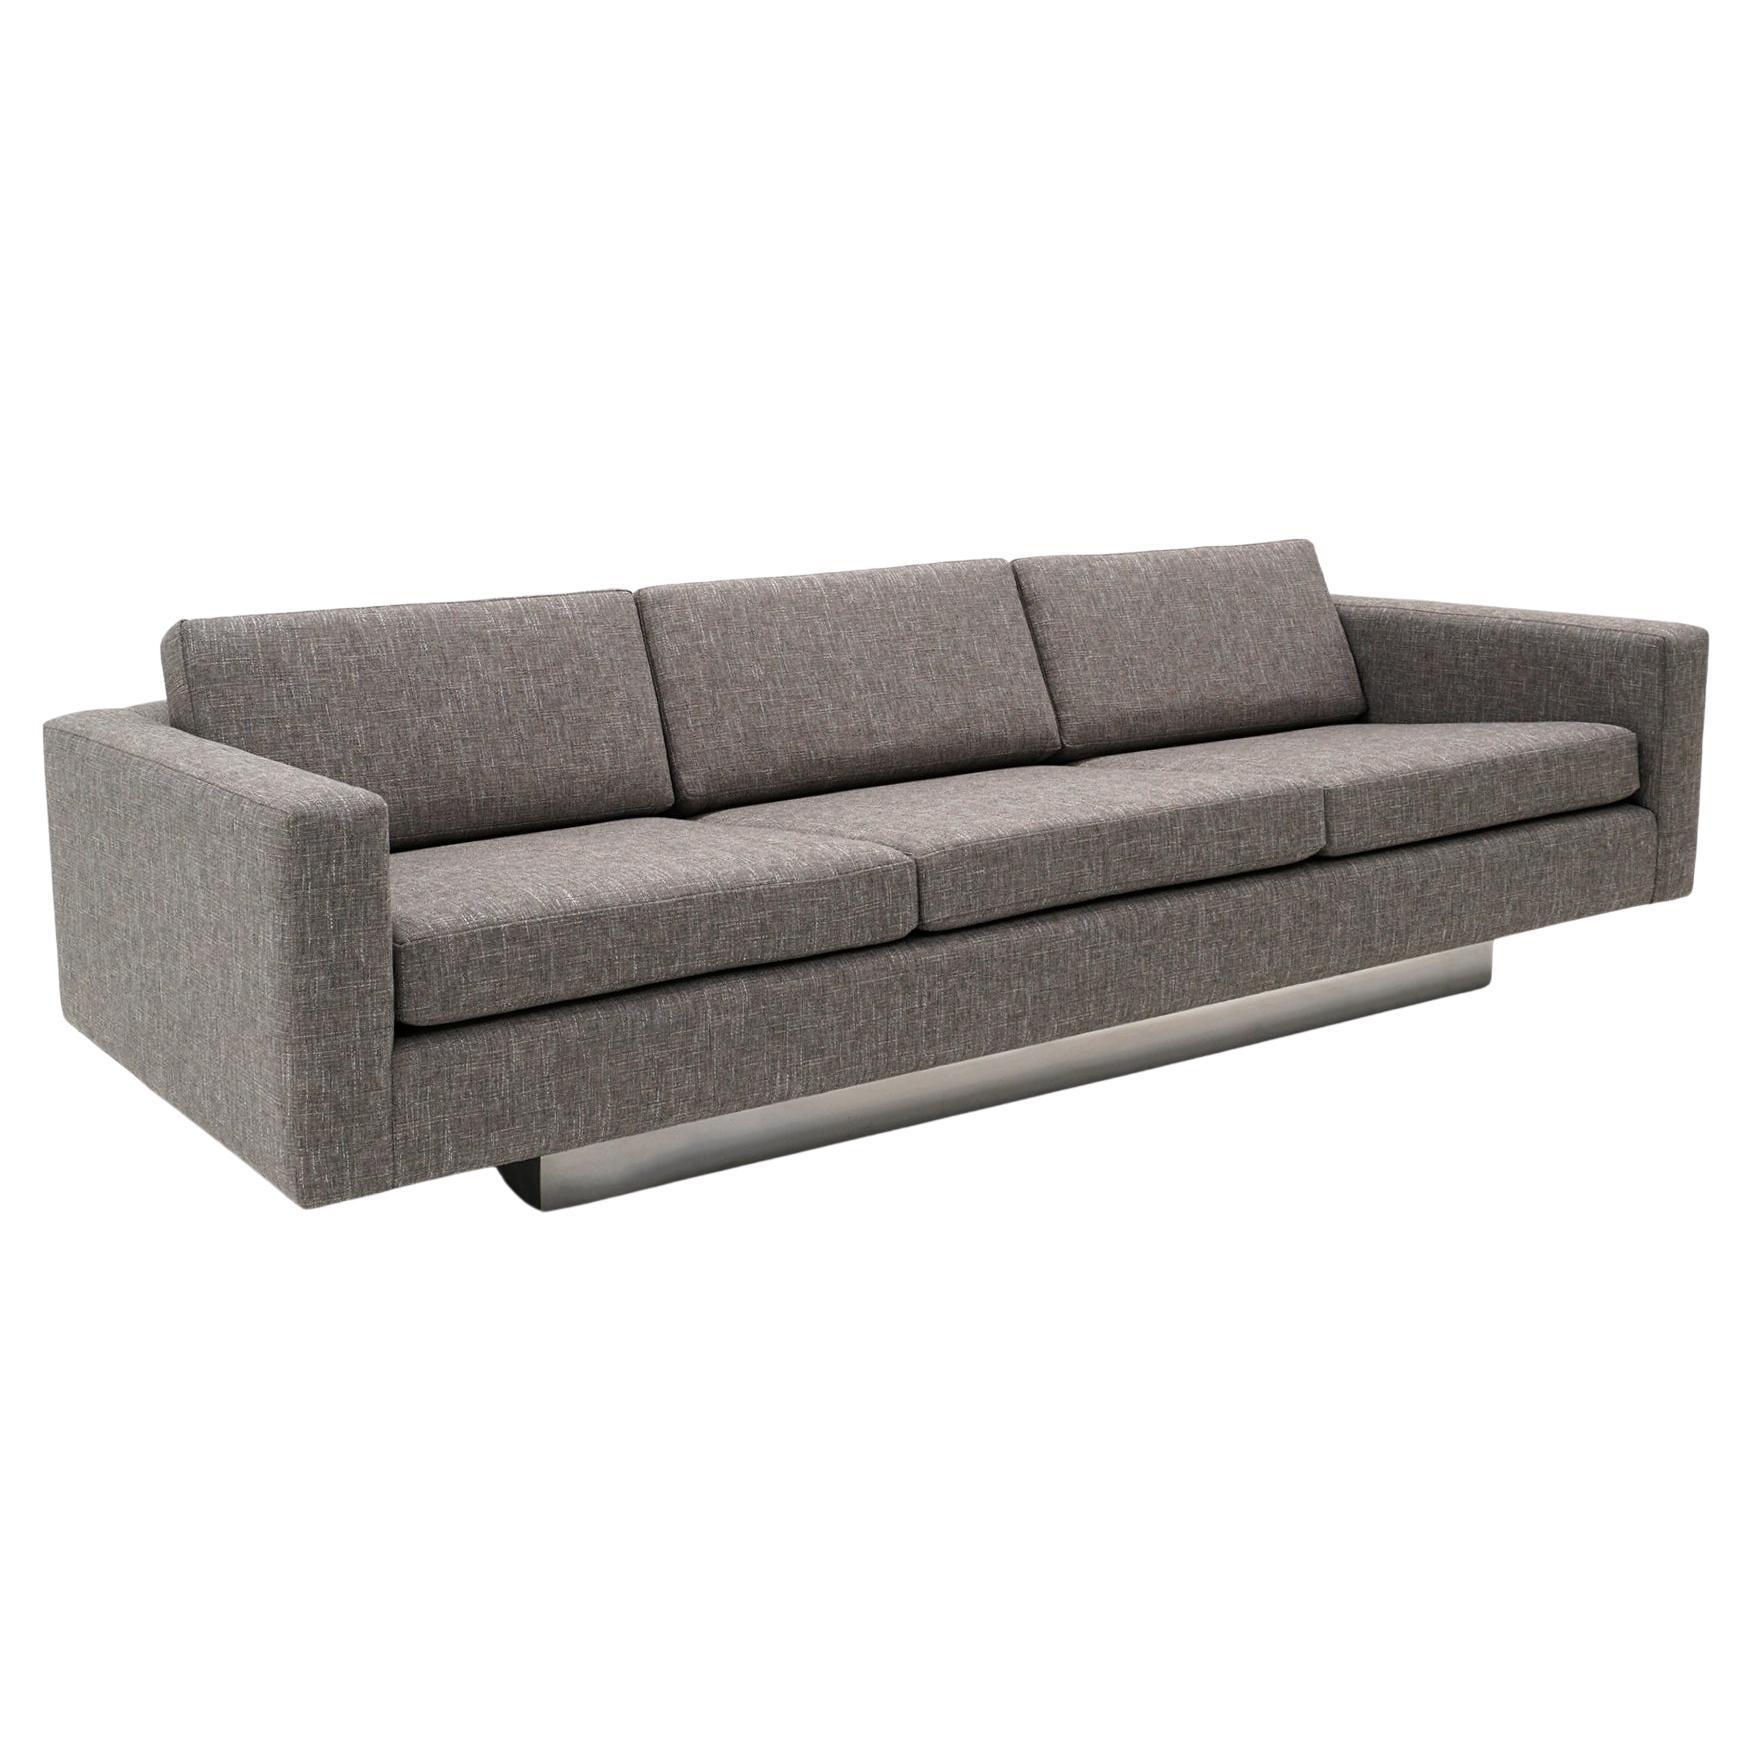 Expertly reupholstered three seat medium grey sofa with arms attributed to Harvey Probber. Also similar to designs by Milo Baughman. Very high quality construction, heavy, and very comfortable. The sofa floats on a solid wood base clad in chromed